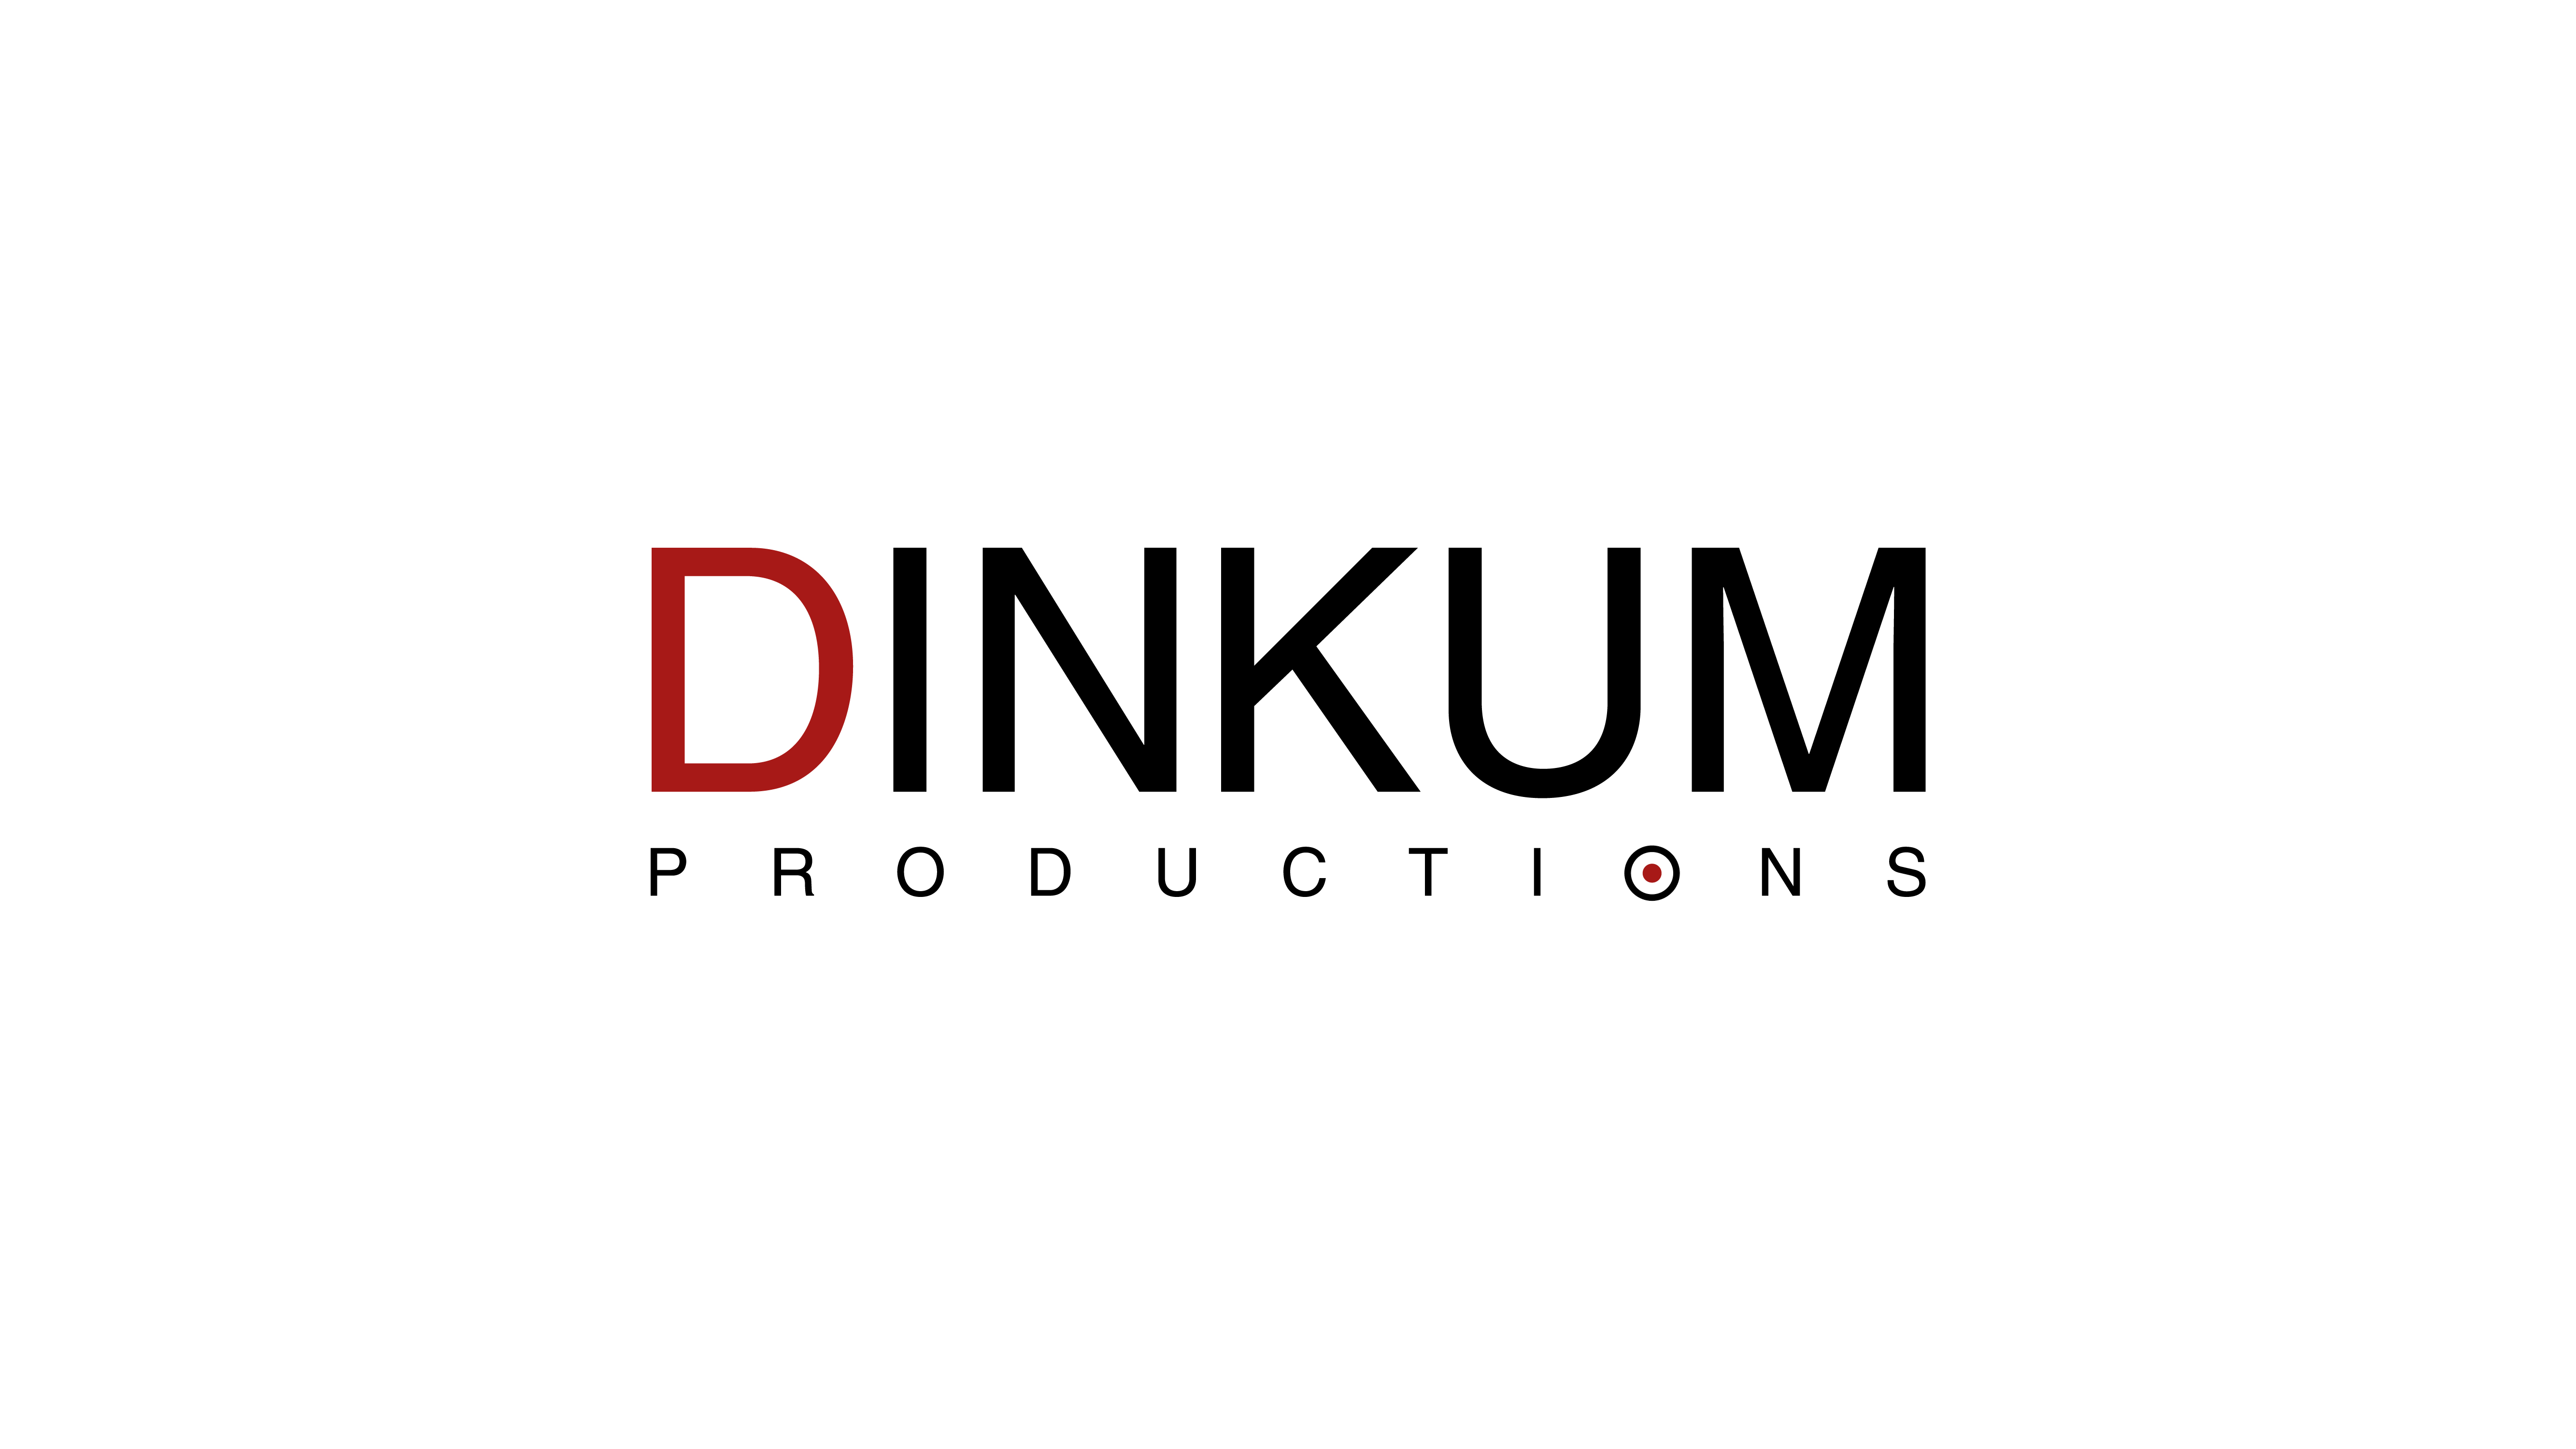 The logo for video production company Dinkum Productions in Macau